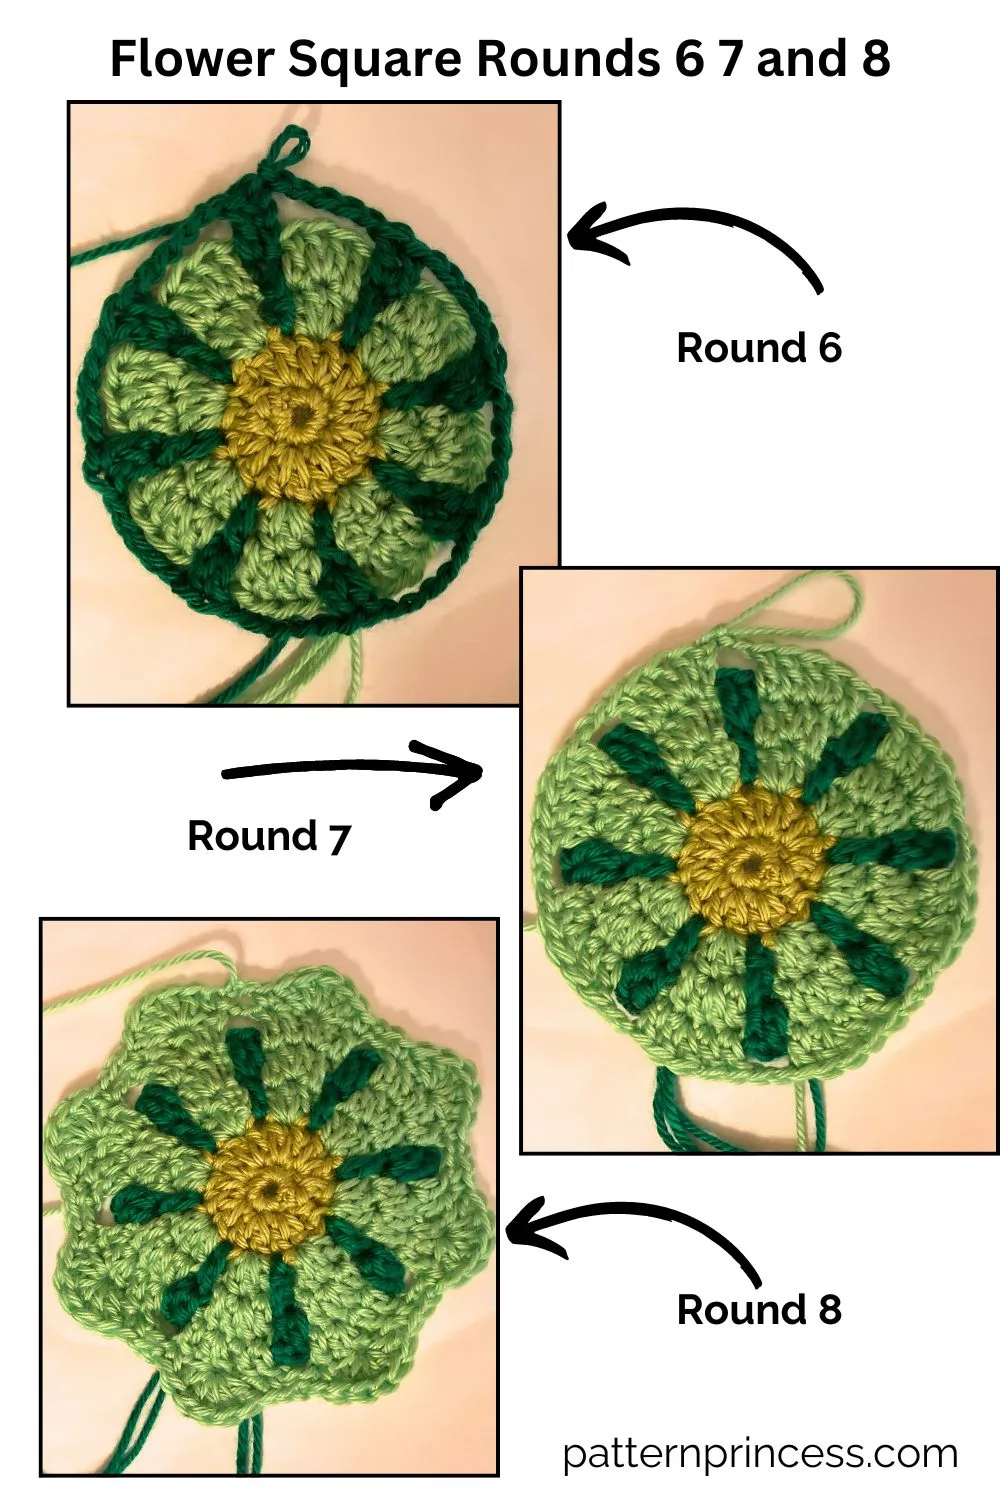 Flower Square Rounds 6 7 and 8